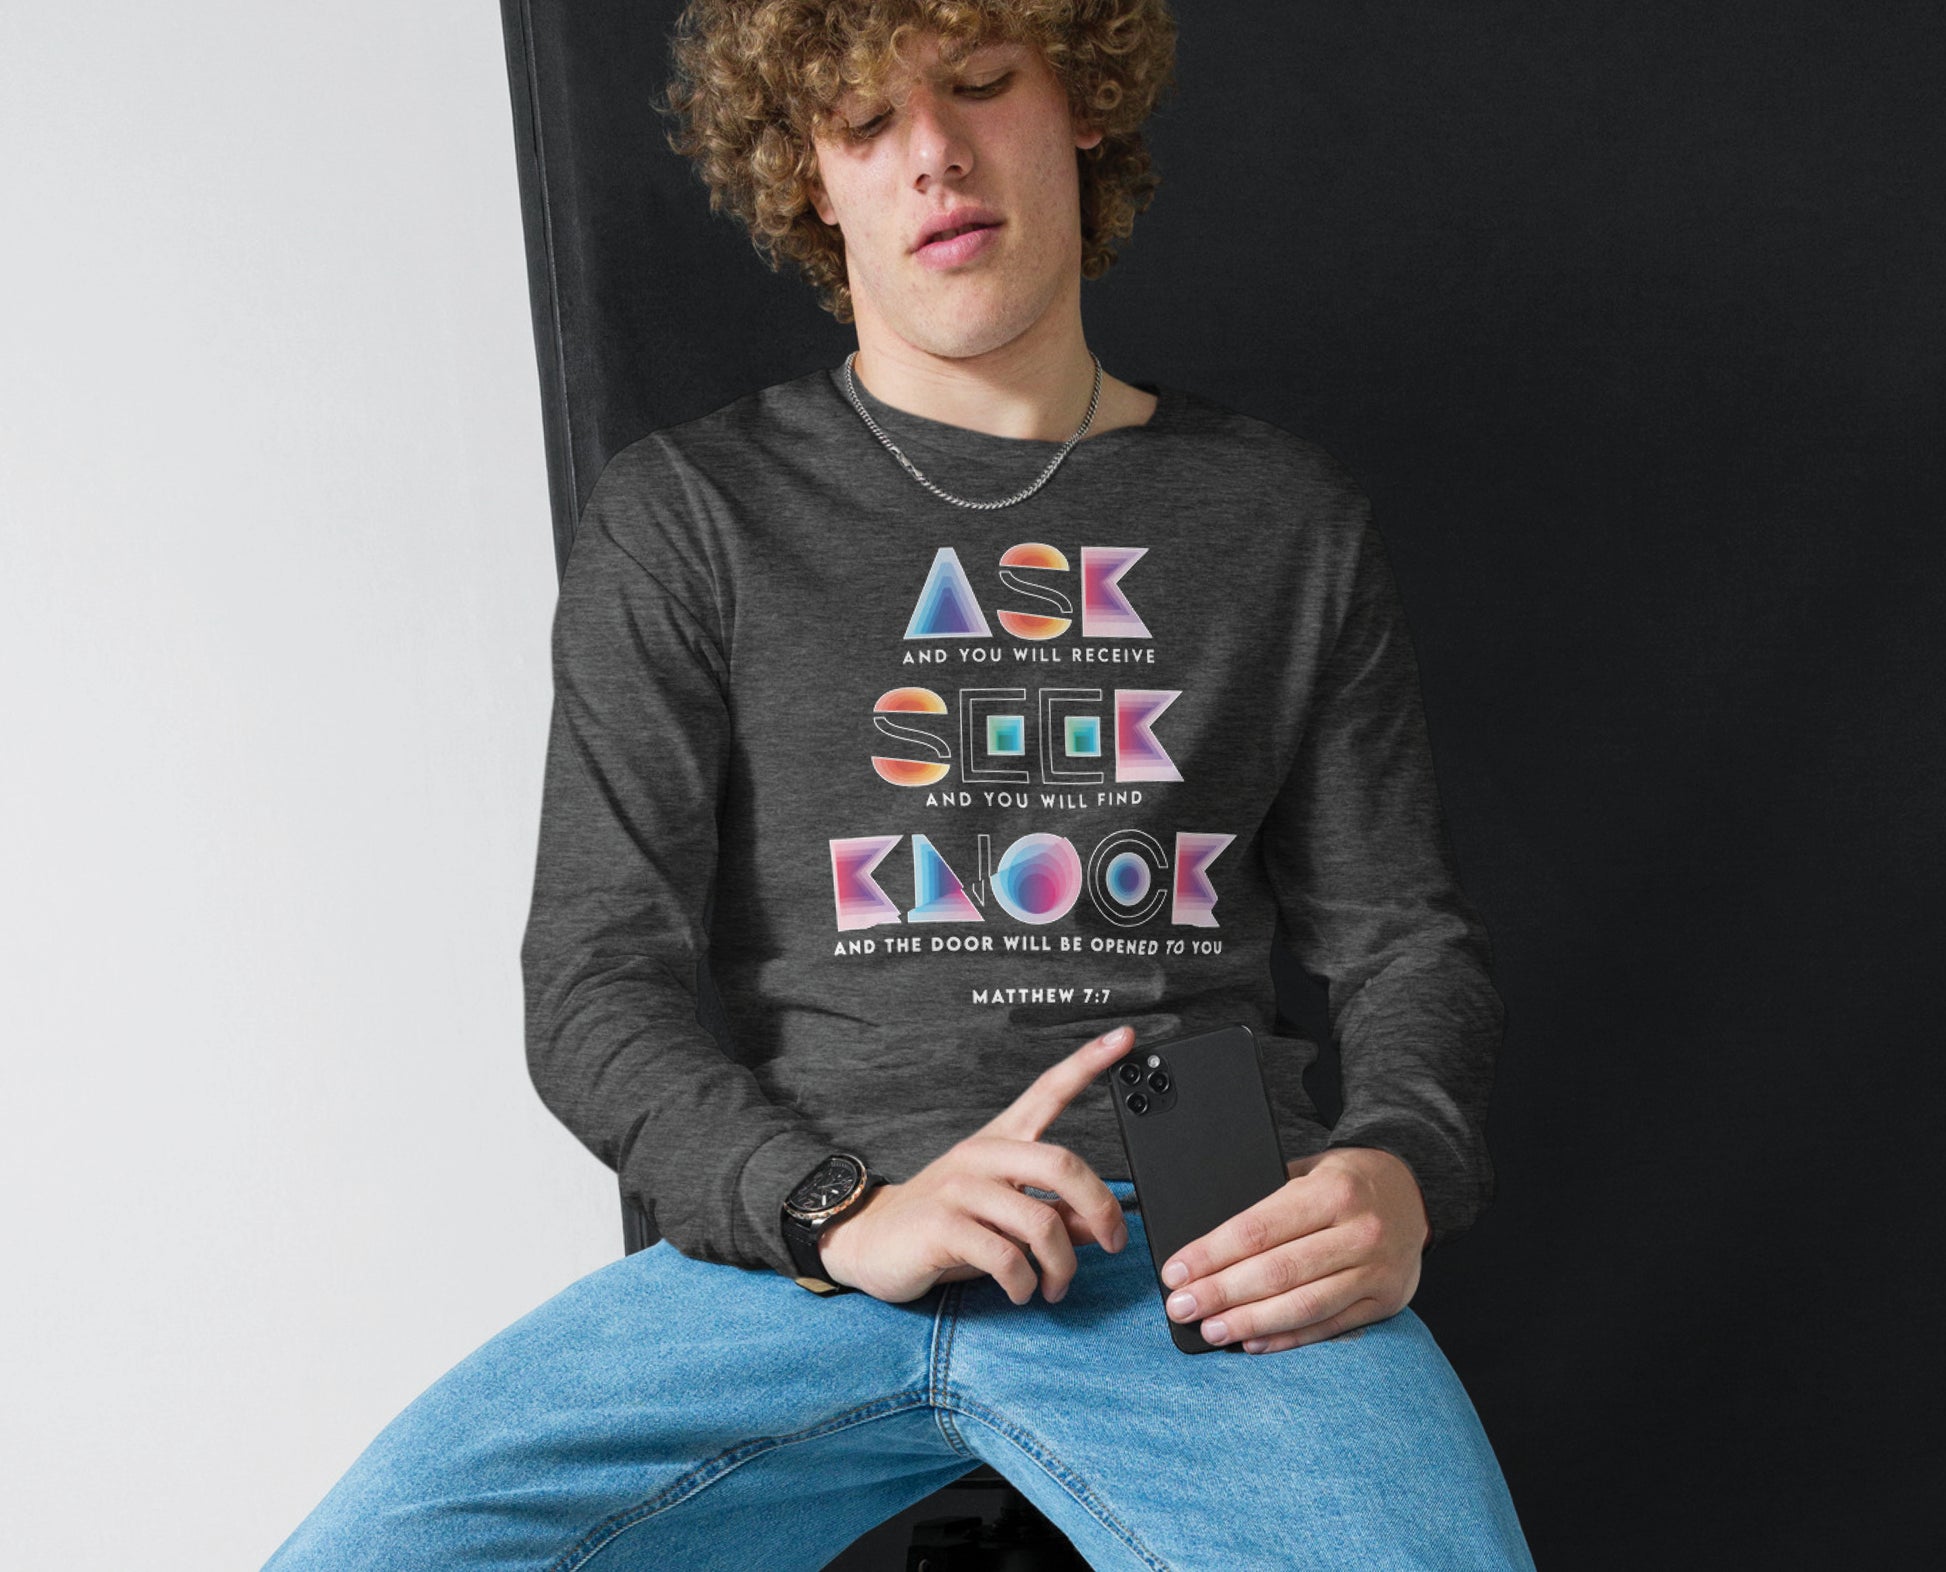 Ask Seek Knock Matthew 7:7 Christian aesthetic design printed in holographic colors on heather dark gray soft long sleeve tee for men & women